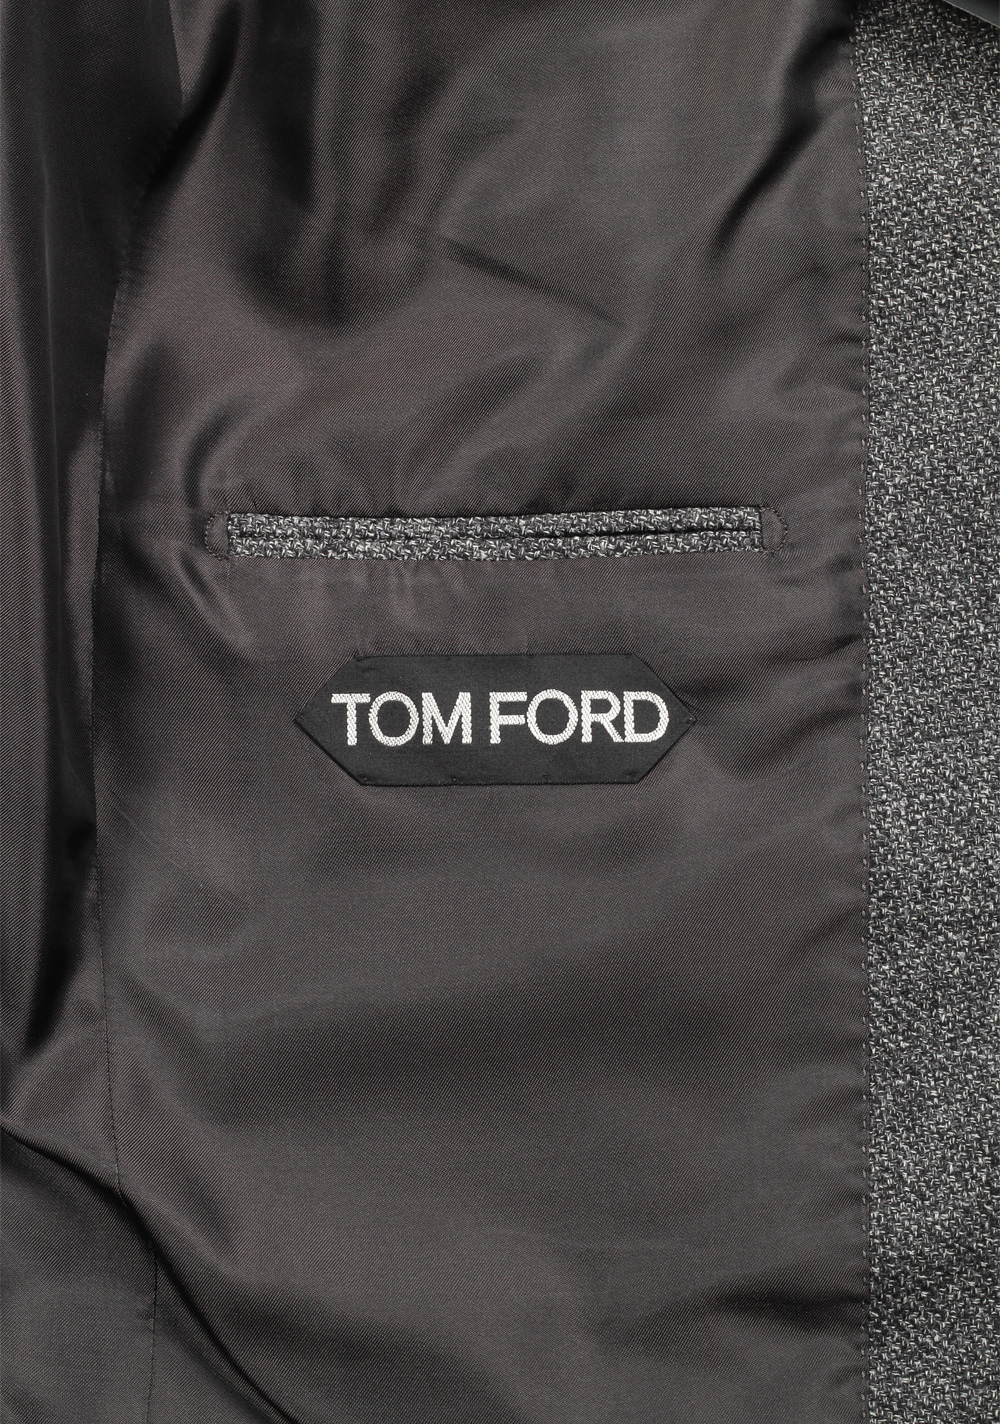 TOM FORD Shelton Gray Sport Coat Size 50 / 40R U.S. In Wool | Costume Limité